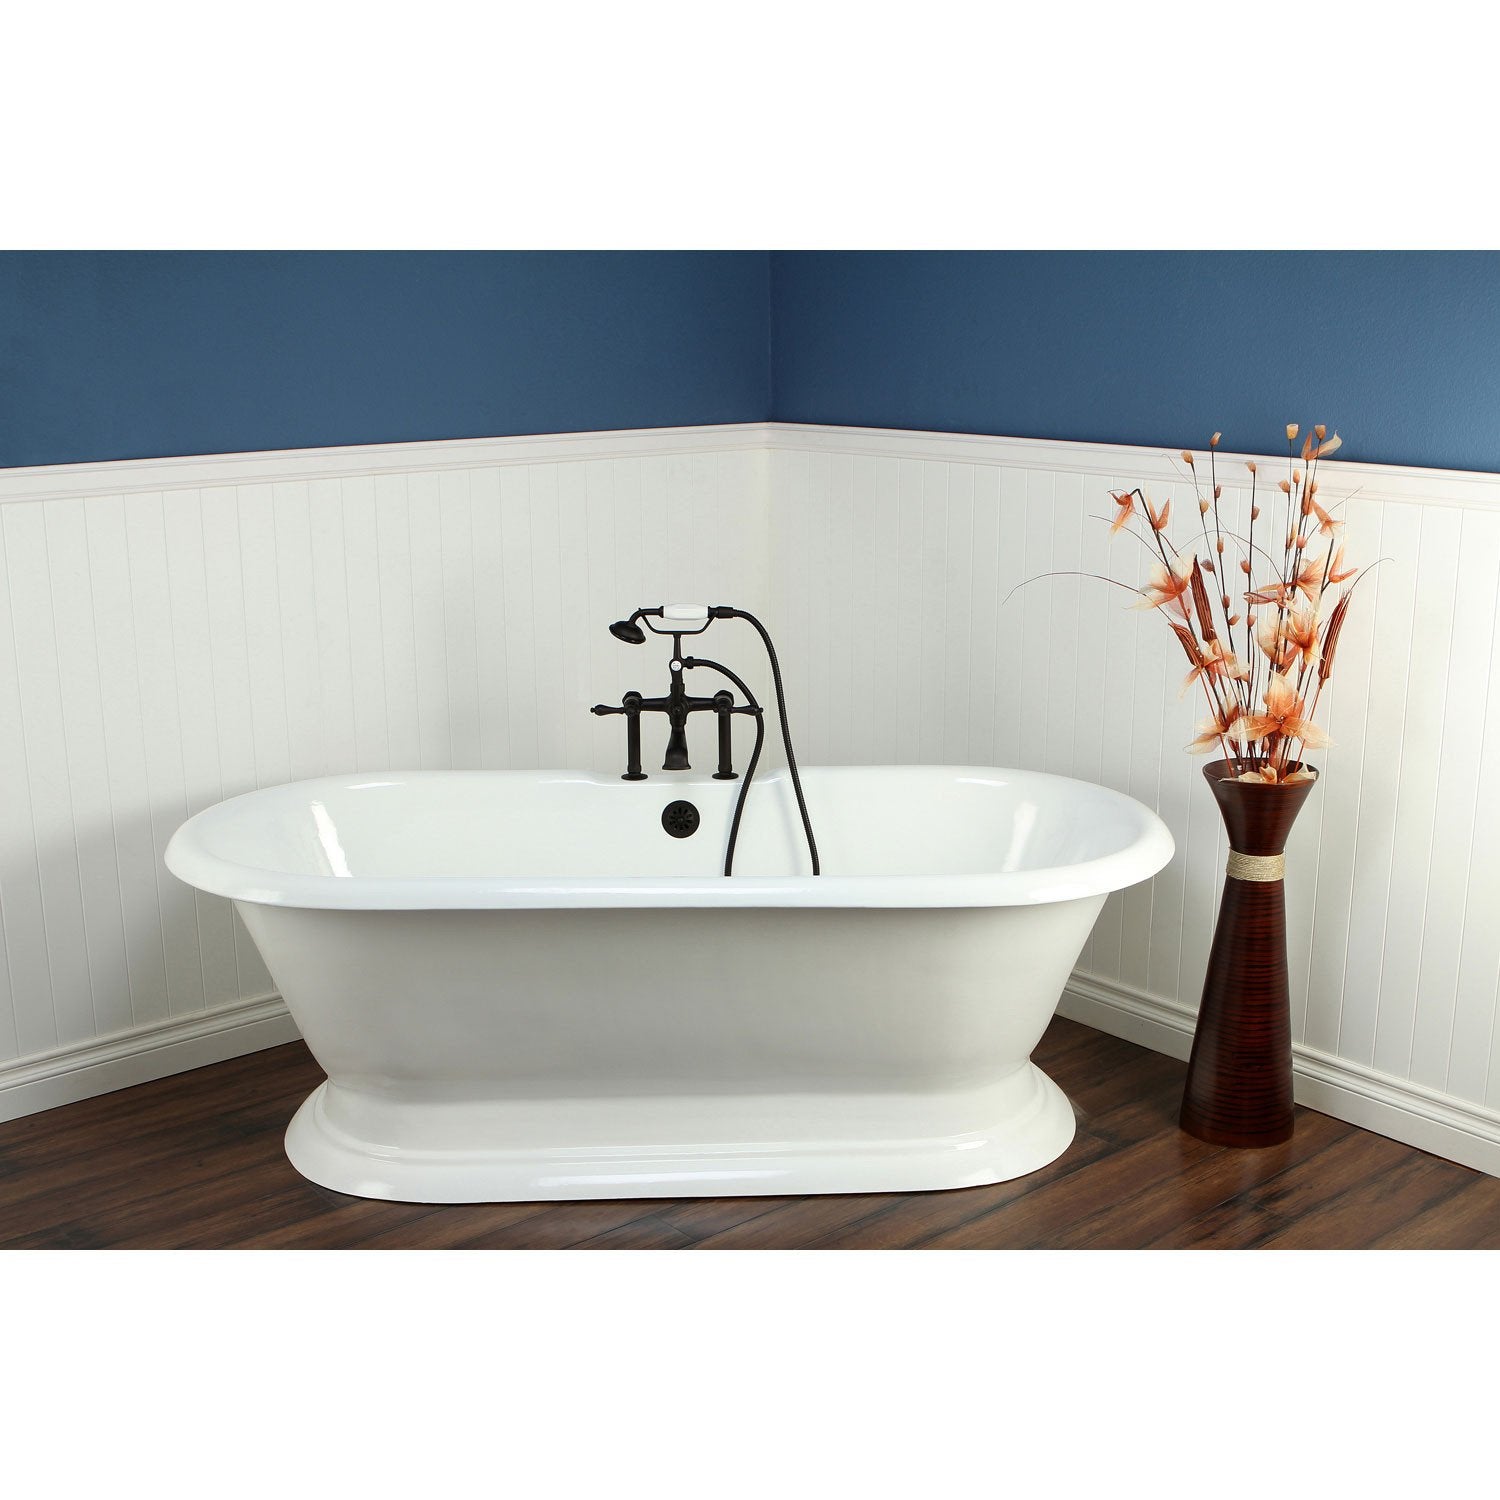 72" Freestanding Tub with Oil Rubbed Bronze Tub Faucet & Hardware Package CTP29